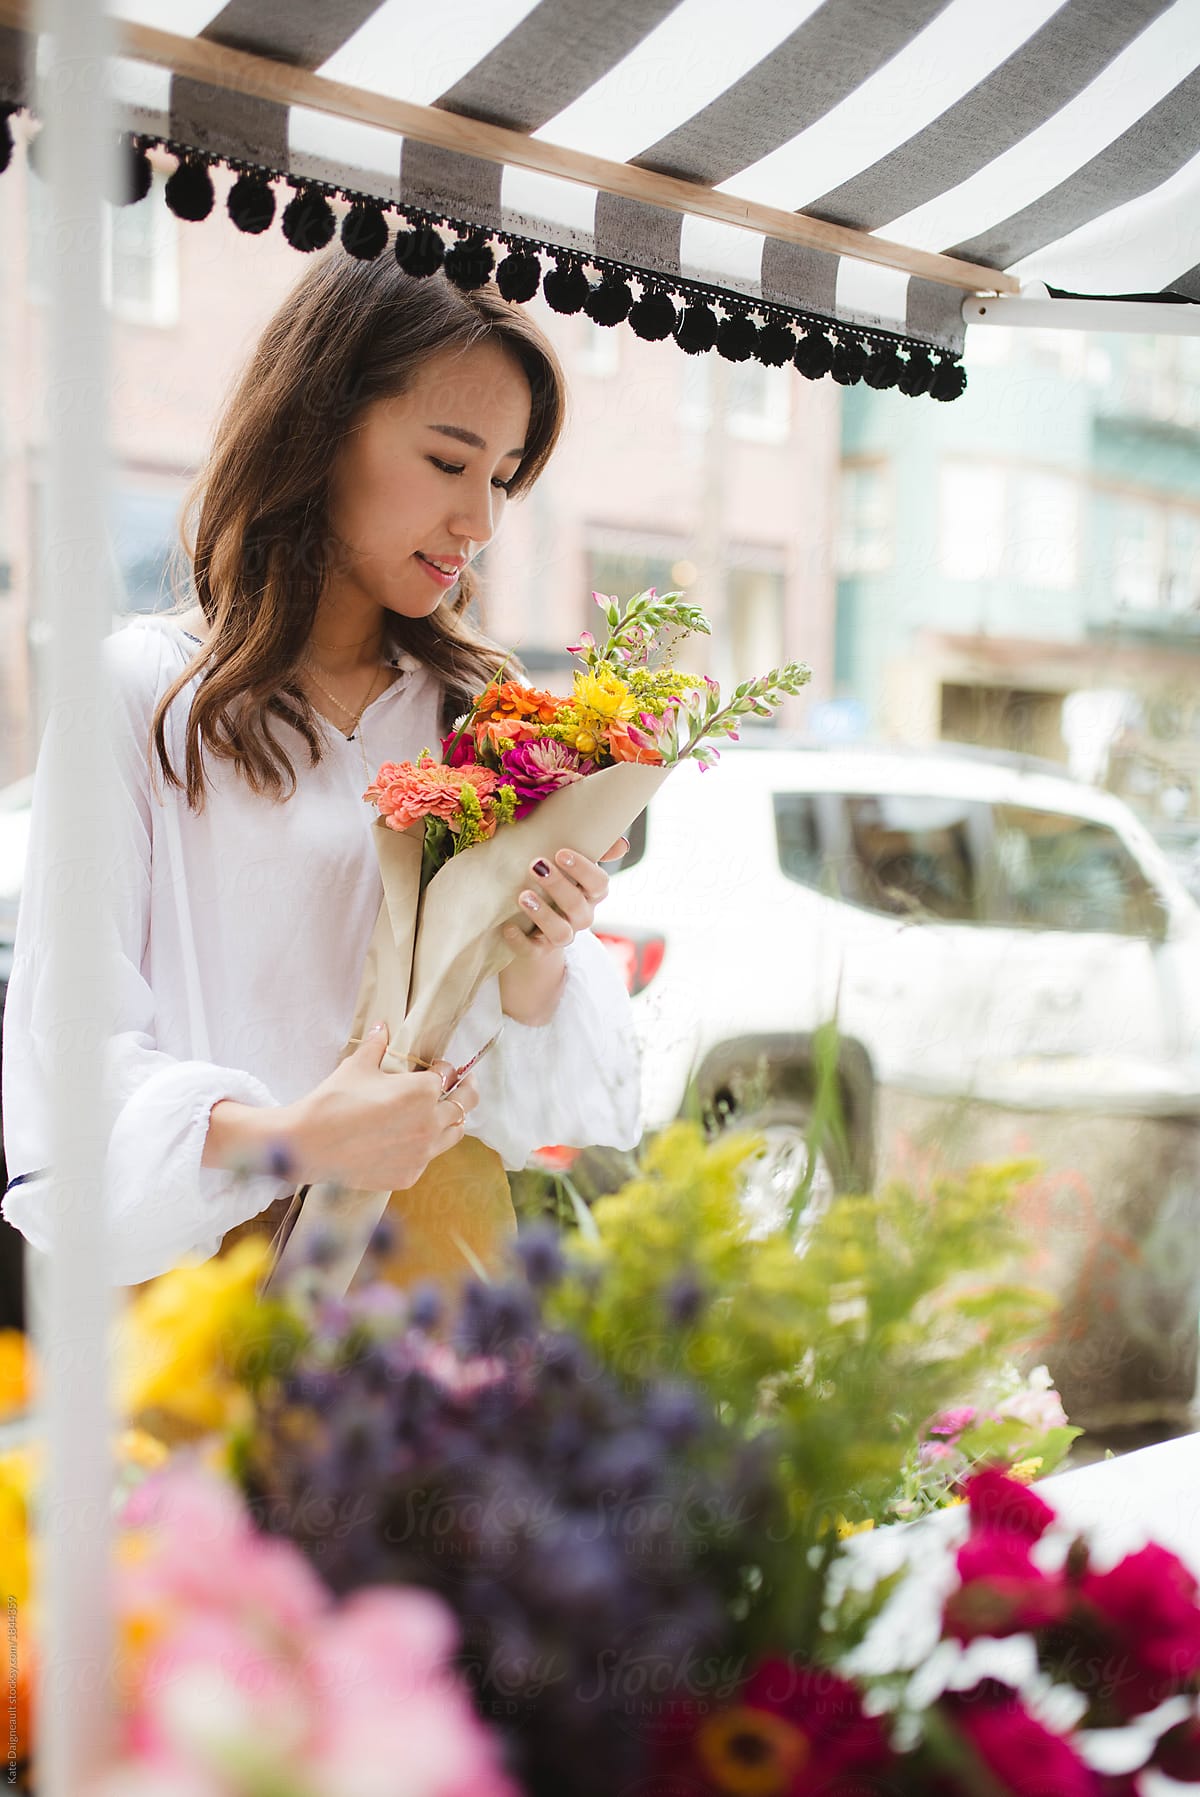 Young woman buying flowers from a city flower cart